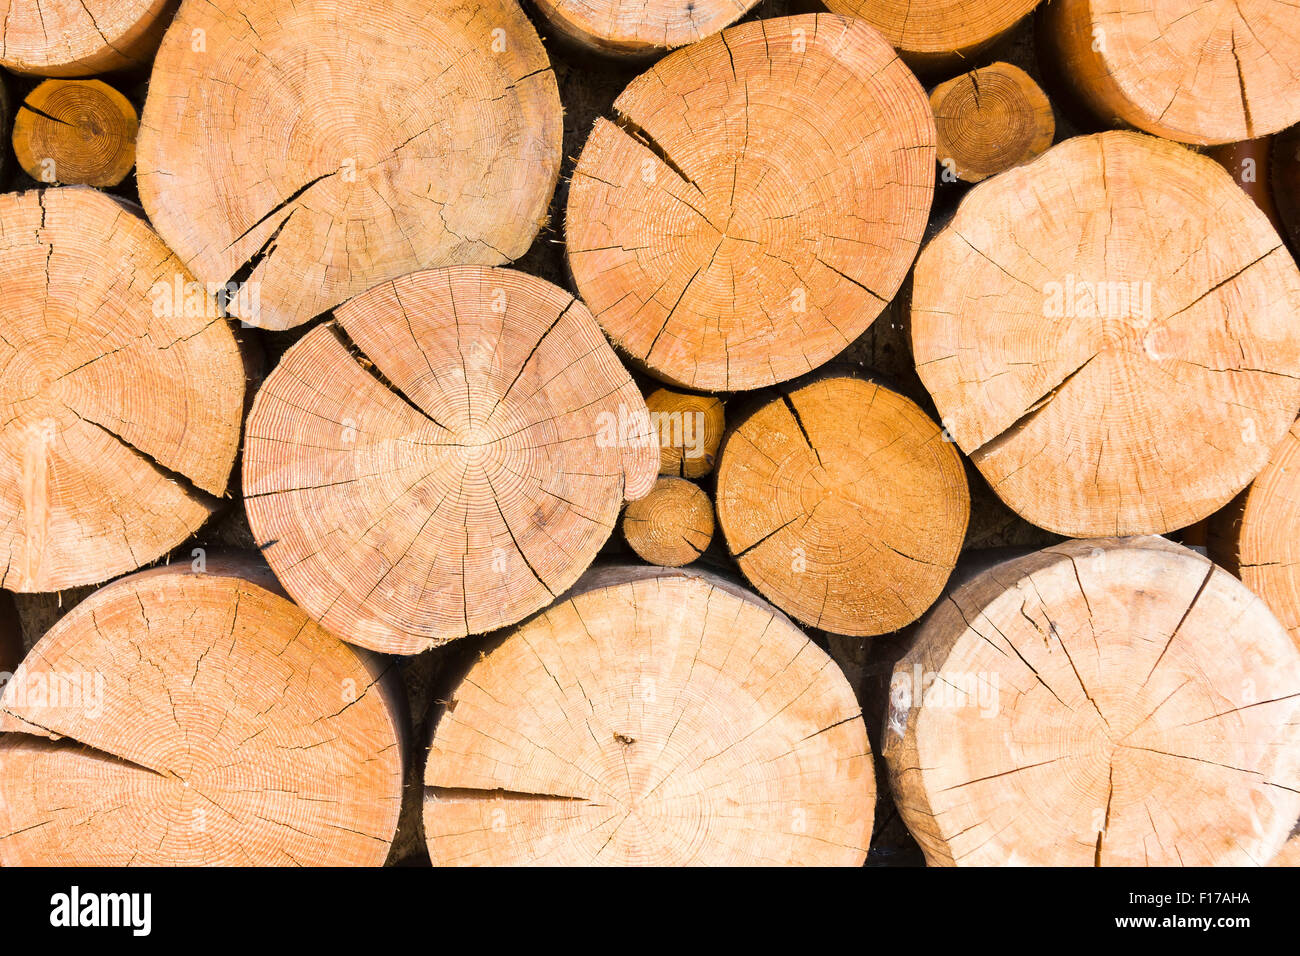 Many large and thick cracked tree beams in a pile Stock Photo